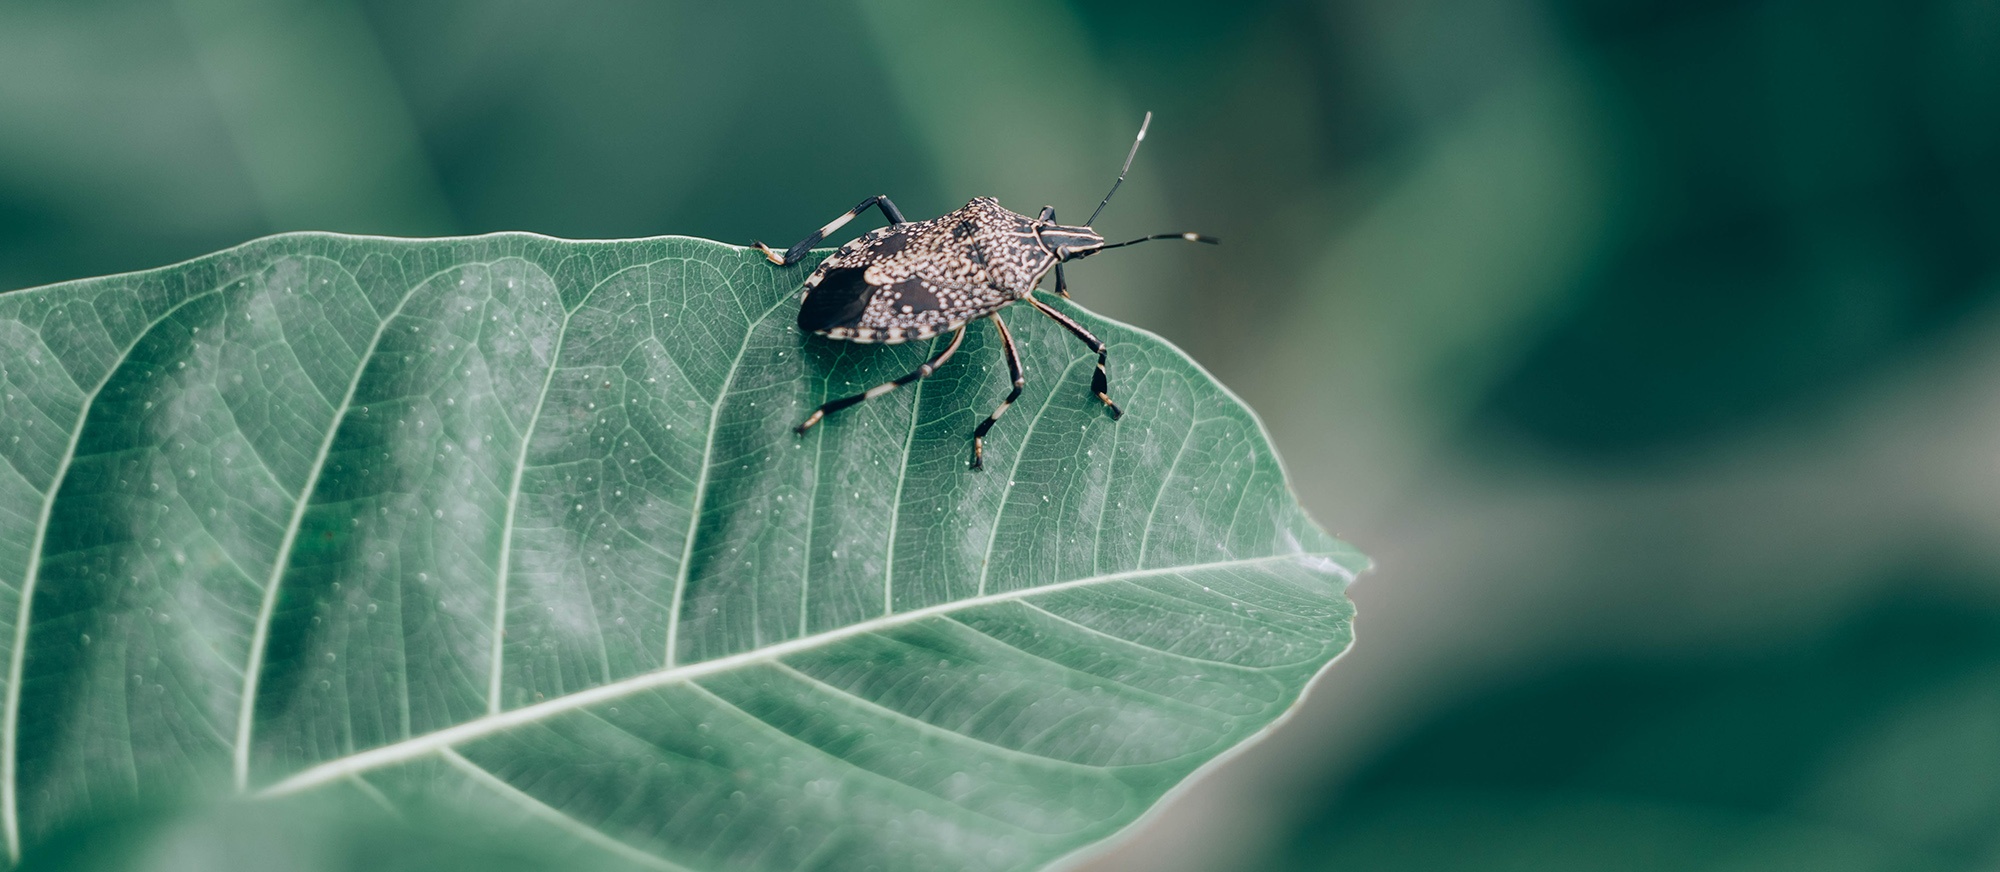 Stink bugs in Macadamia- Greenlife Crop Protection Africa